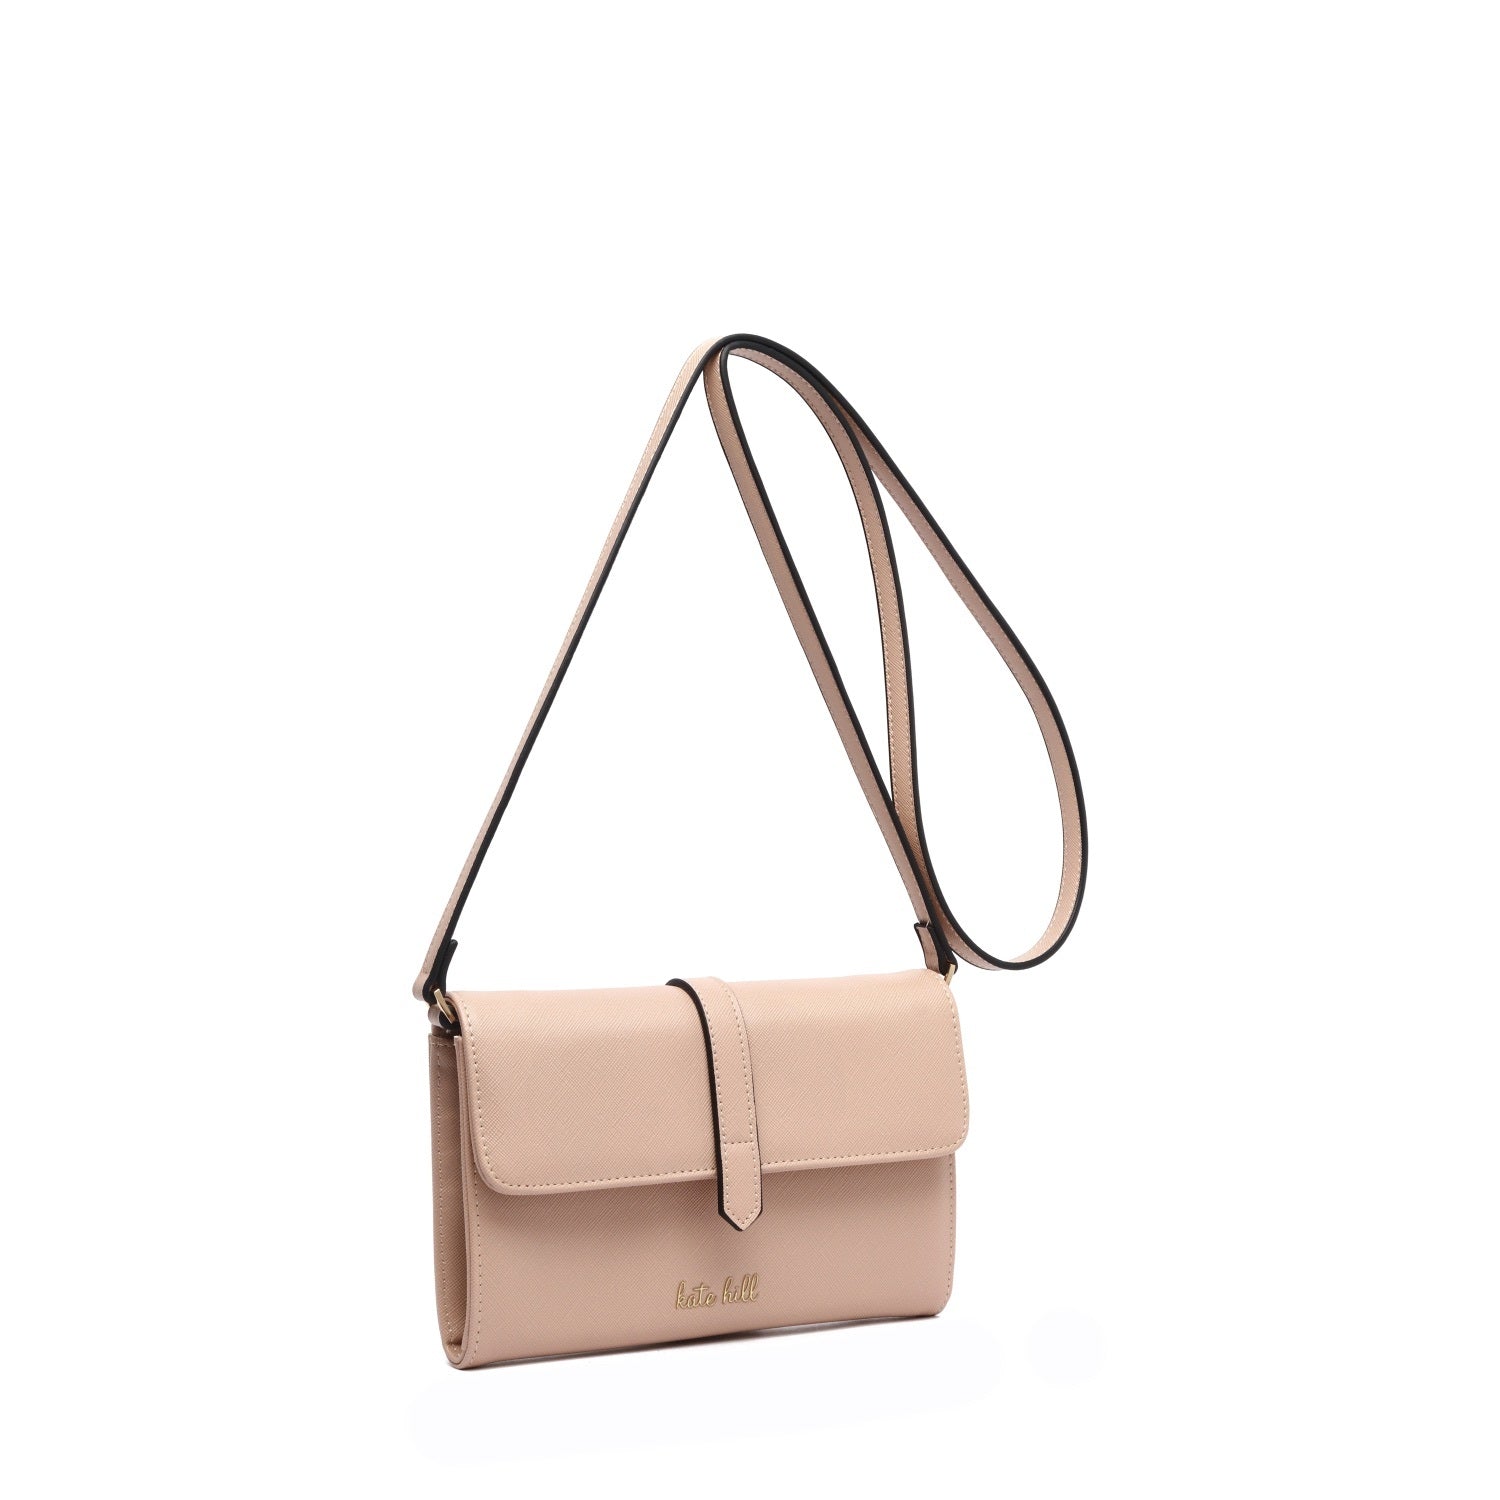 Kate Hill - Everly Crossbody KH-22003 - Nude-2